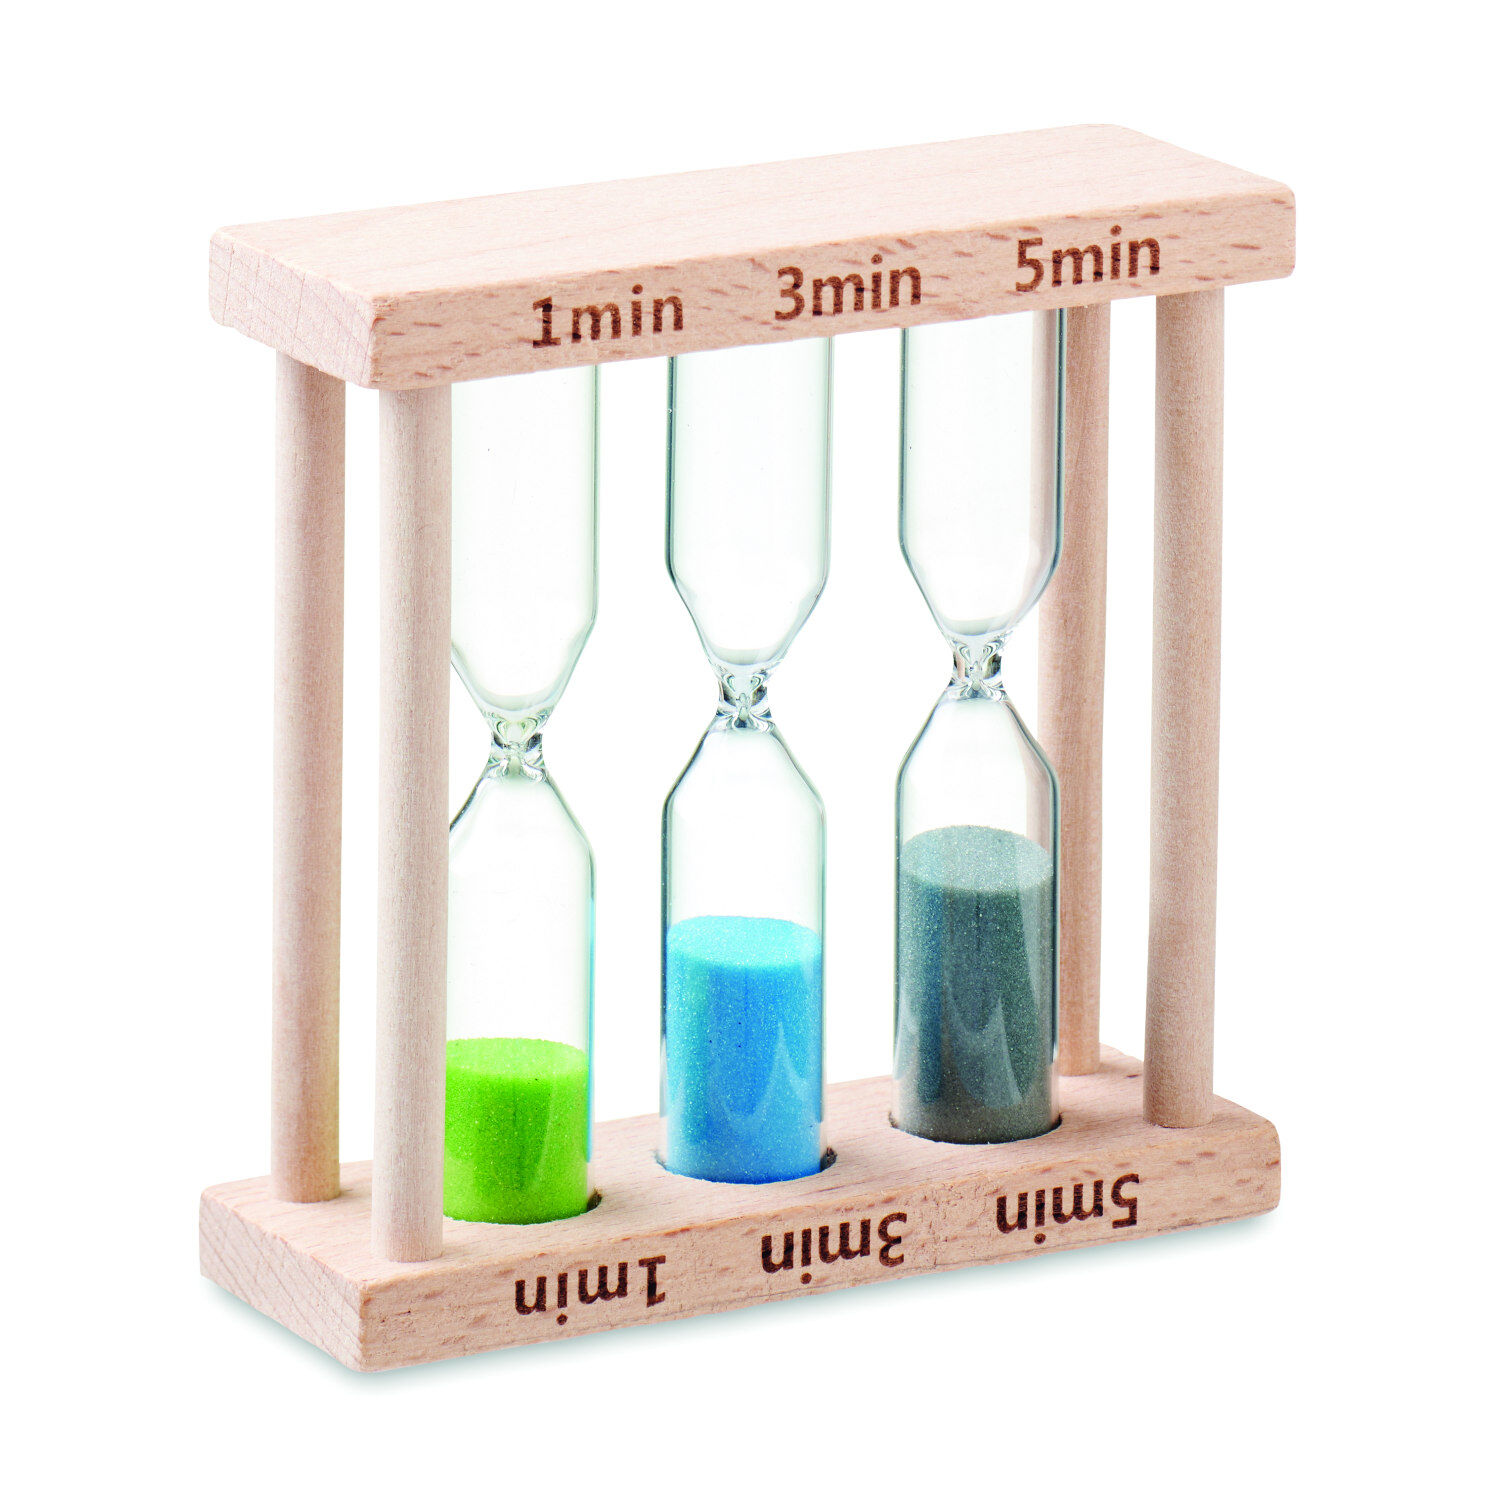 Set of 3 Hourglass Sand Timers